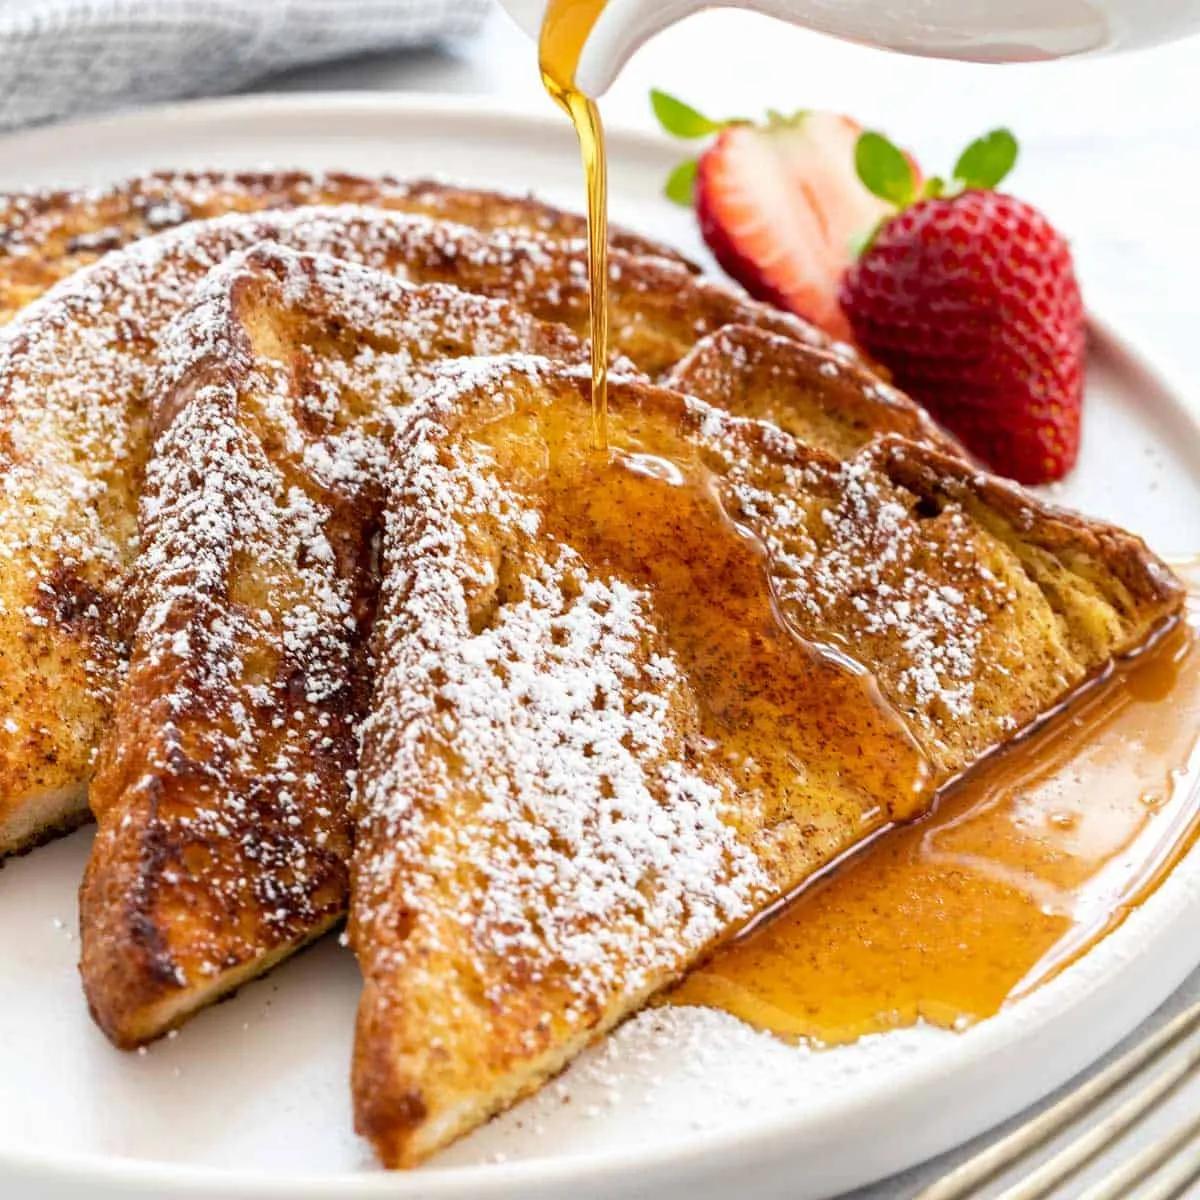 How to make French toast? - whoopzz